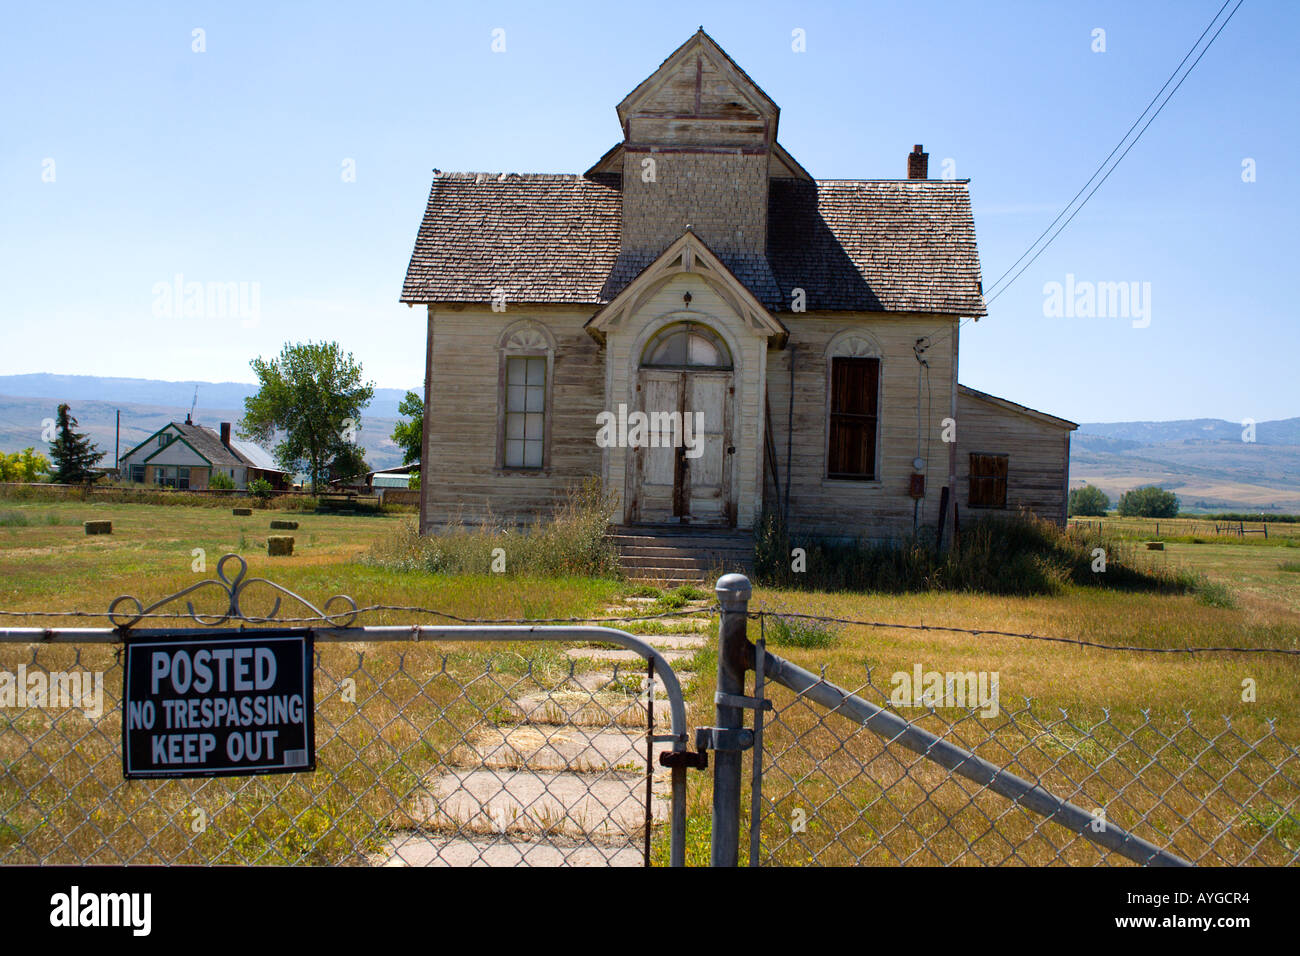 Old Deserted Mormon Church Posted No Trespassing Keep  Out Ovid a small town near Paris Idaho USA Stock Photo